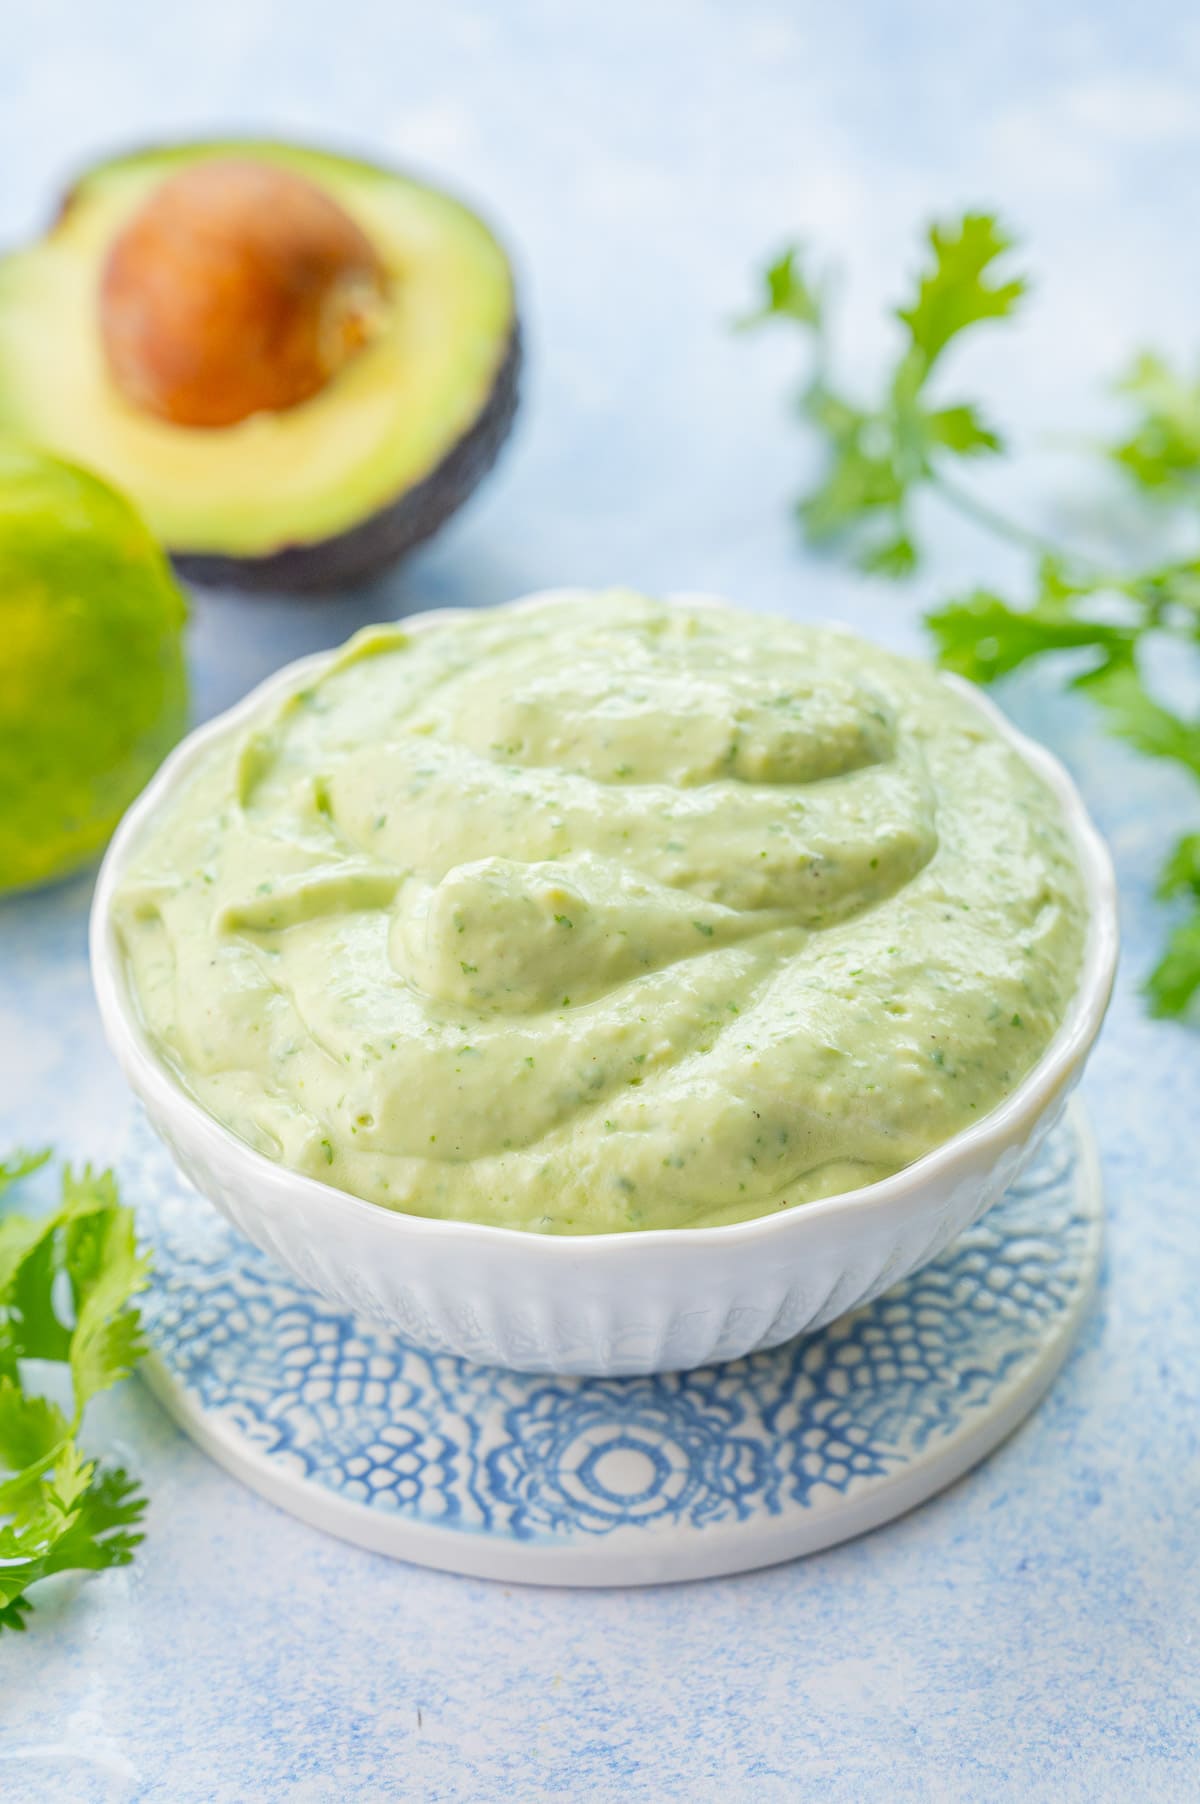 Avocado sauce in a white bowl on a blue background.